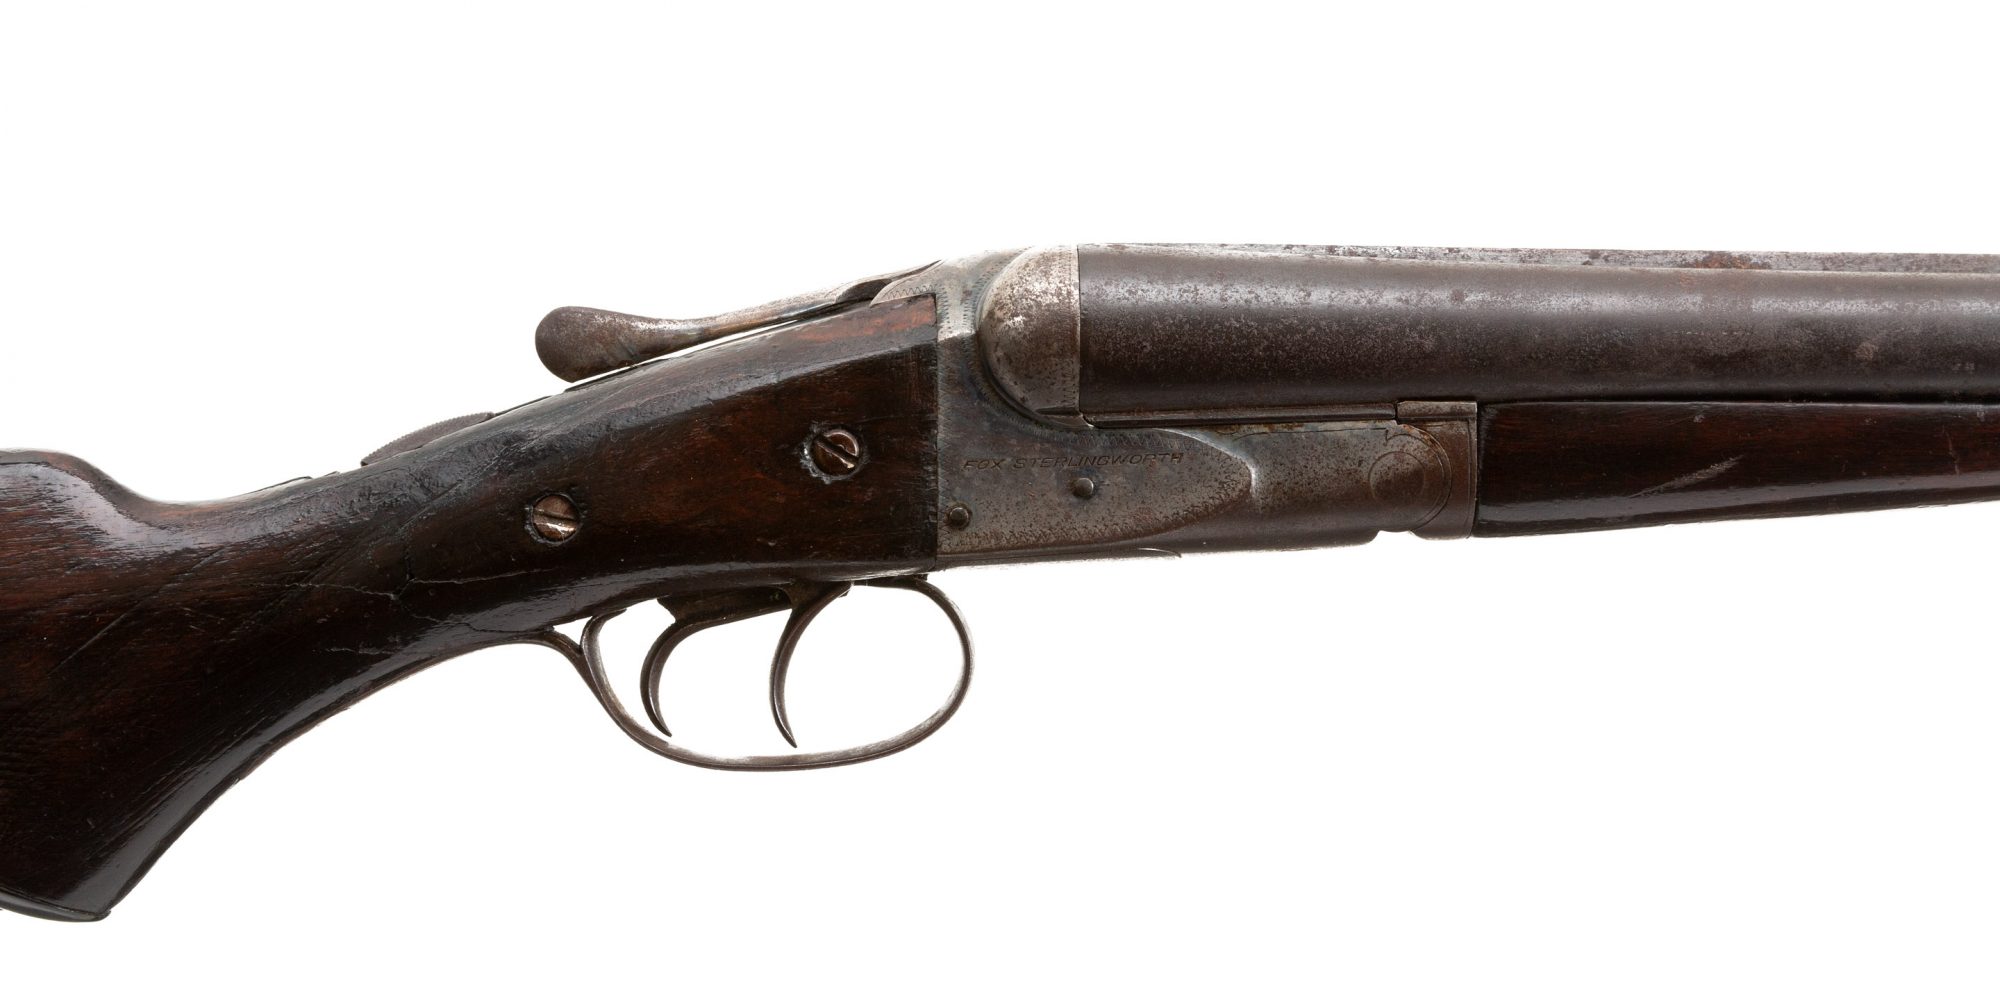 Fox Sterlingworth 12 Gauge Shotgun from 1932, before restoration work performed by Turnbull Restoration Co. of Bloomfield, NY